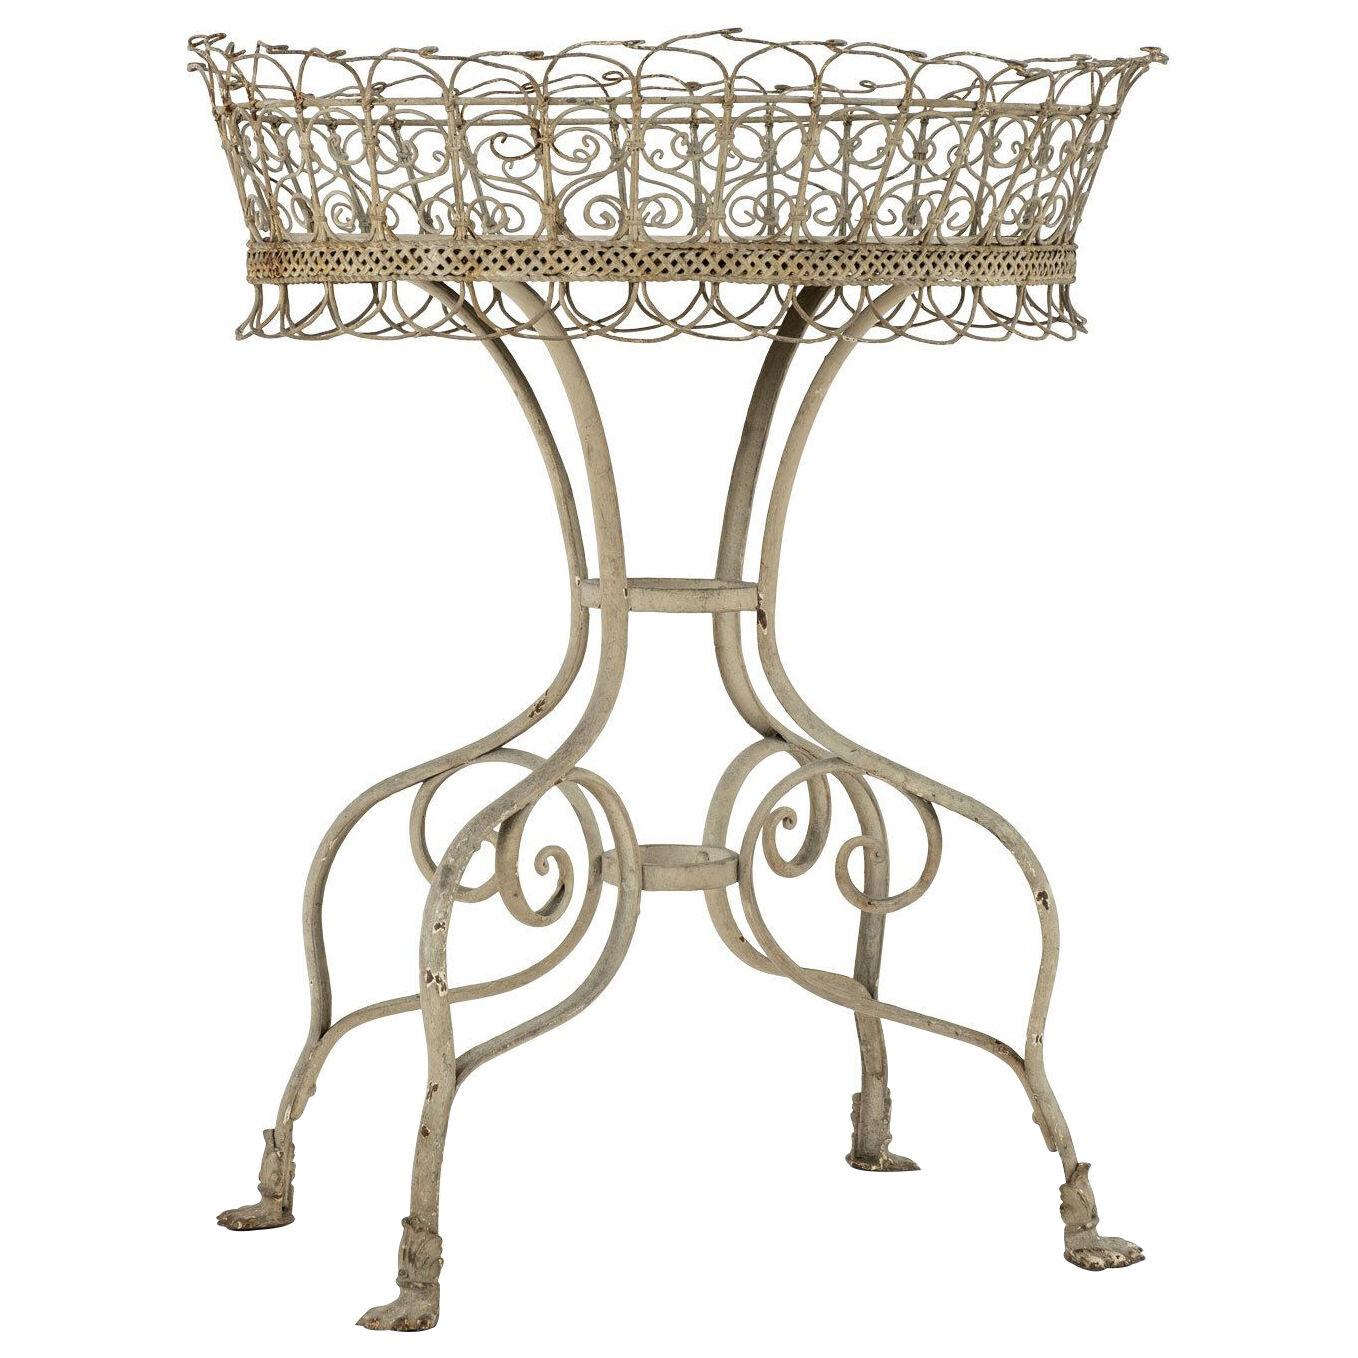 Iron Standing Jardiniere in the Style of Arras